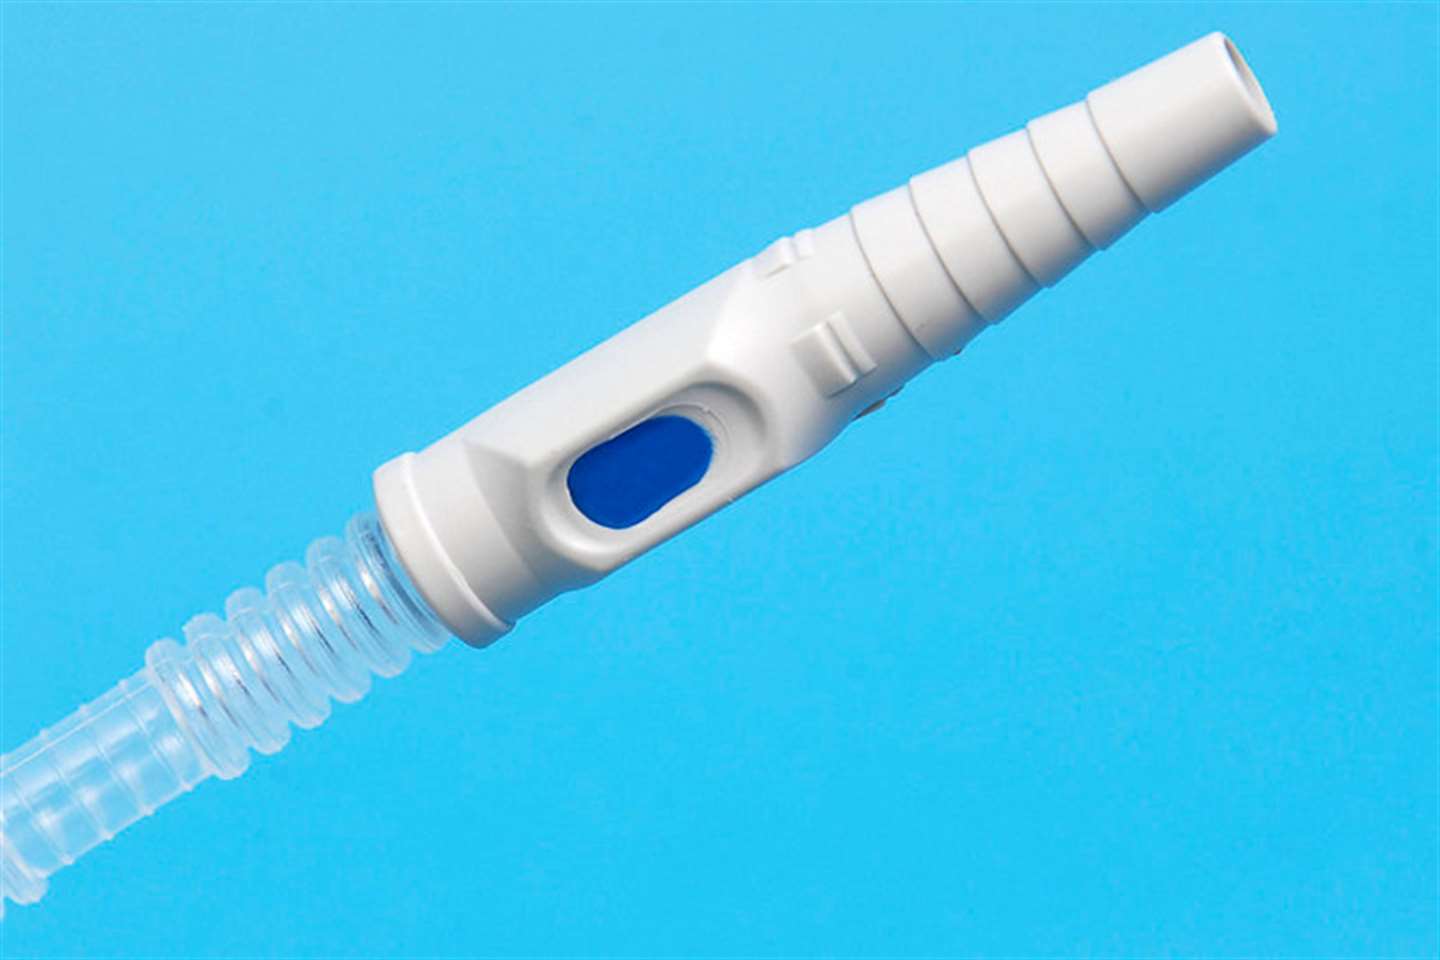 Catheter connector with urine aspiration port